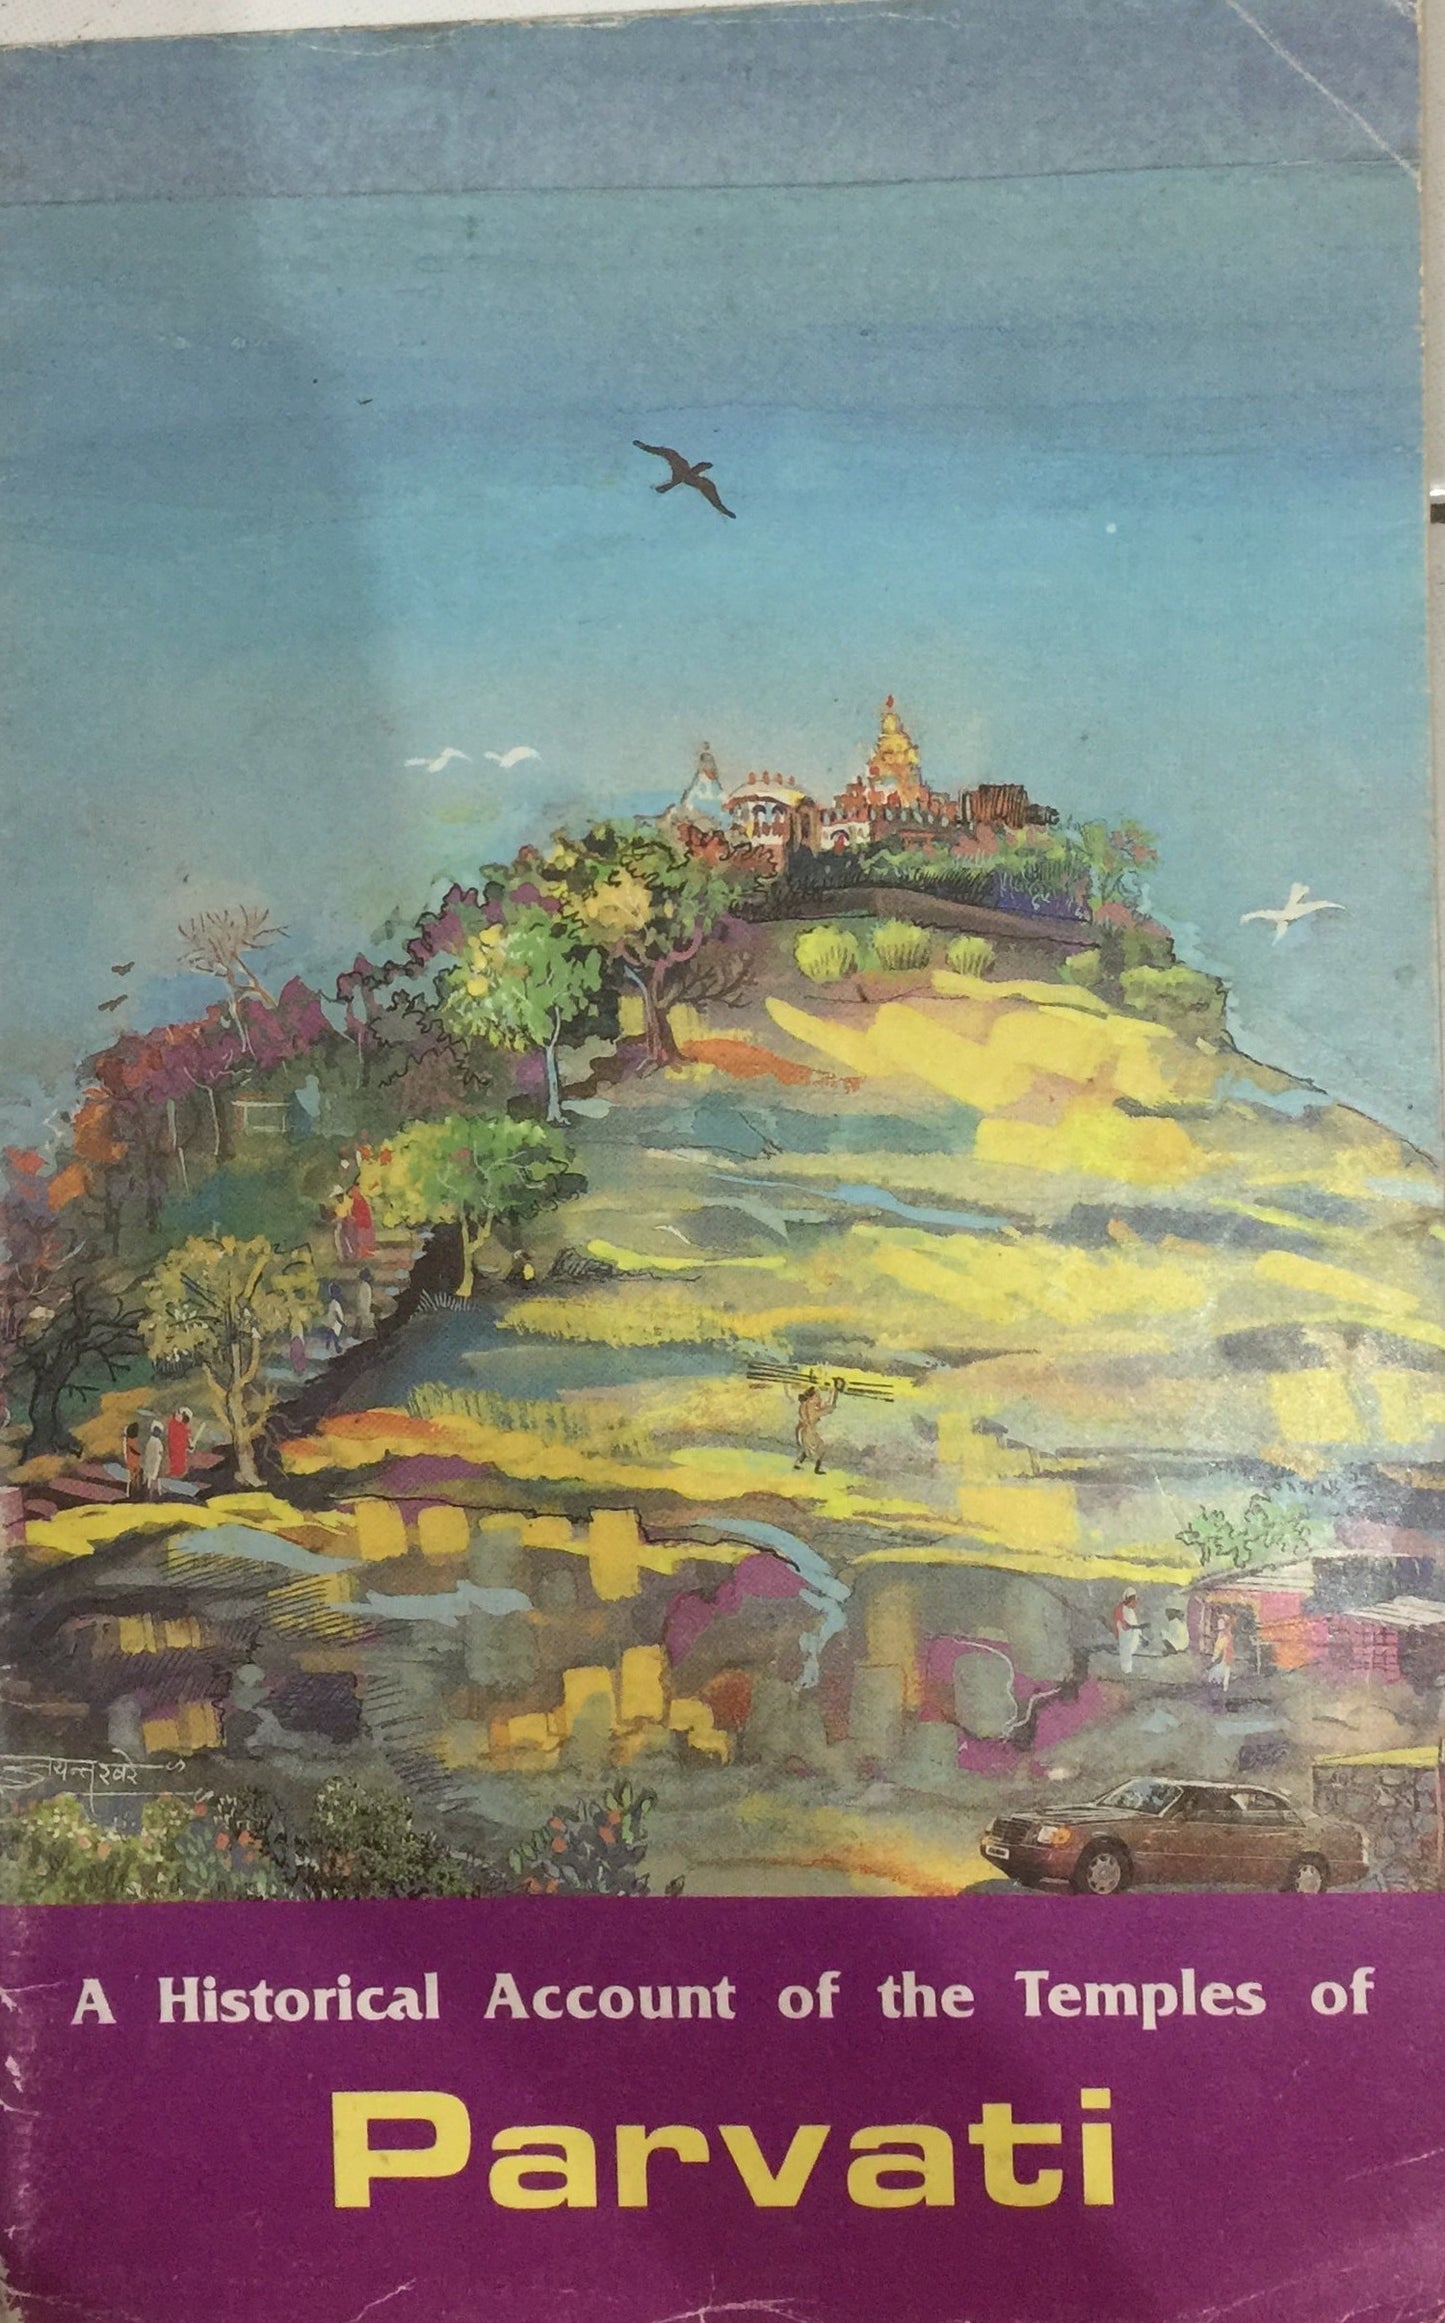 A Historical Account of the Temples of Parvati by V K Nulkar